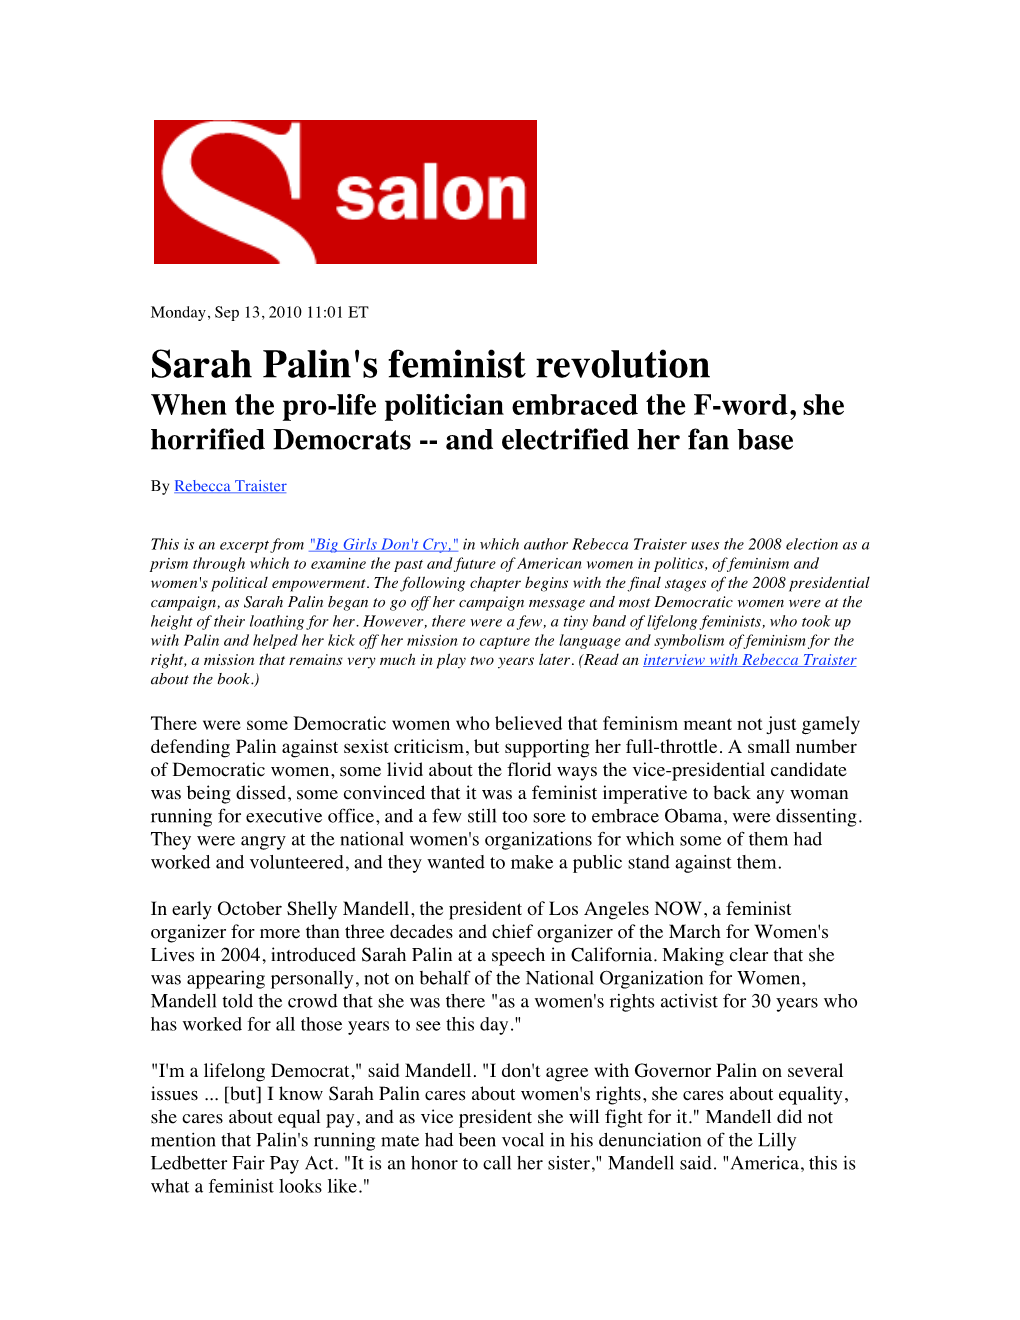 Sarah Palin's Feminist Revolution When the Pro-Life Politician Embraced the F-Word, She Horrified Democrats -- and Electrified Her Fan Base